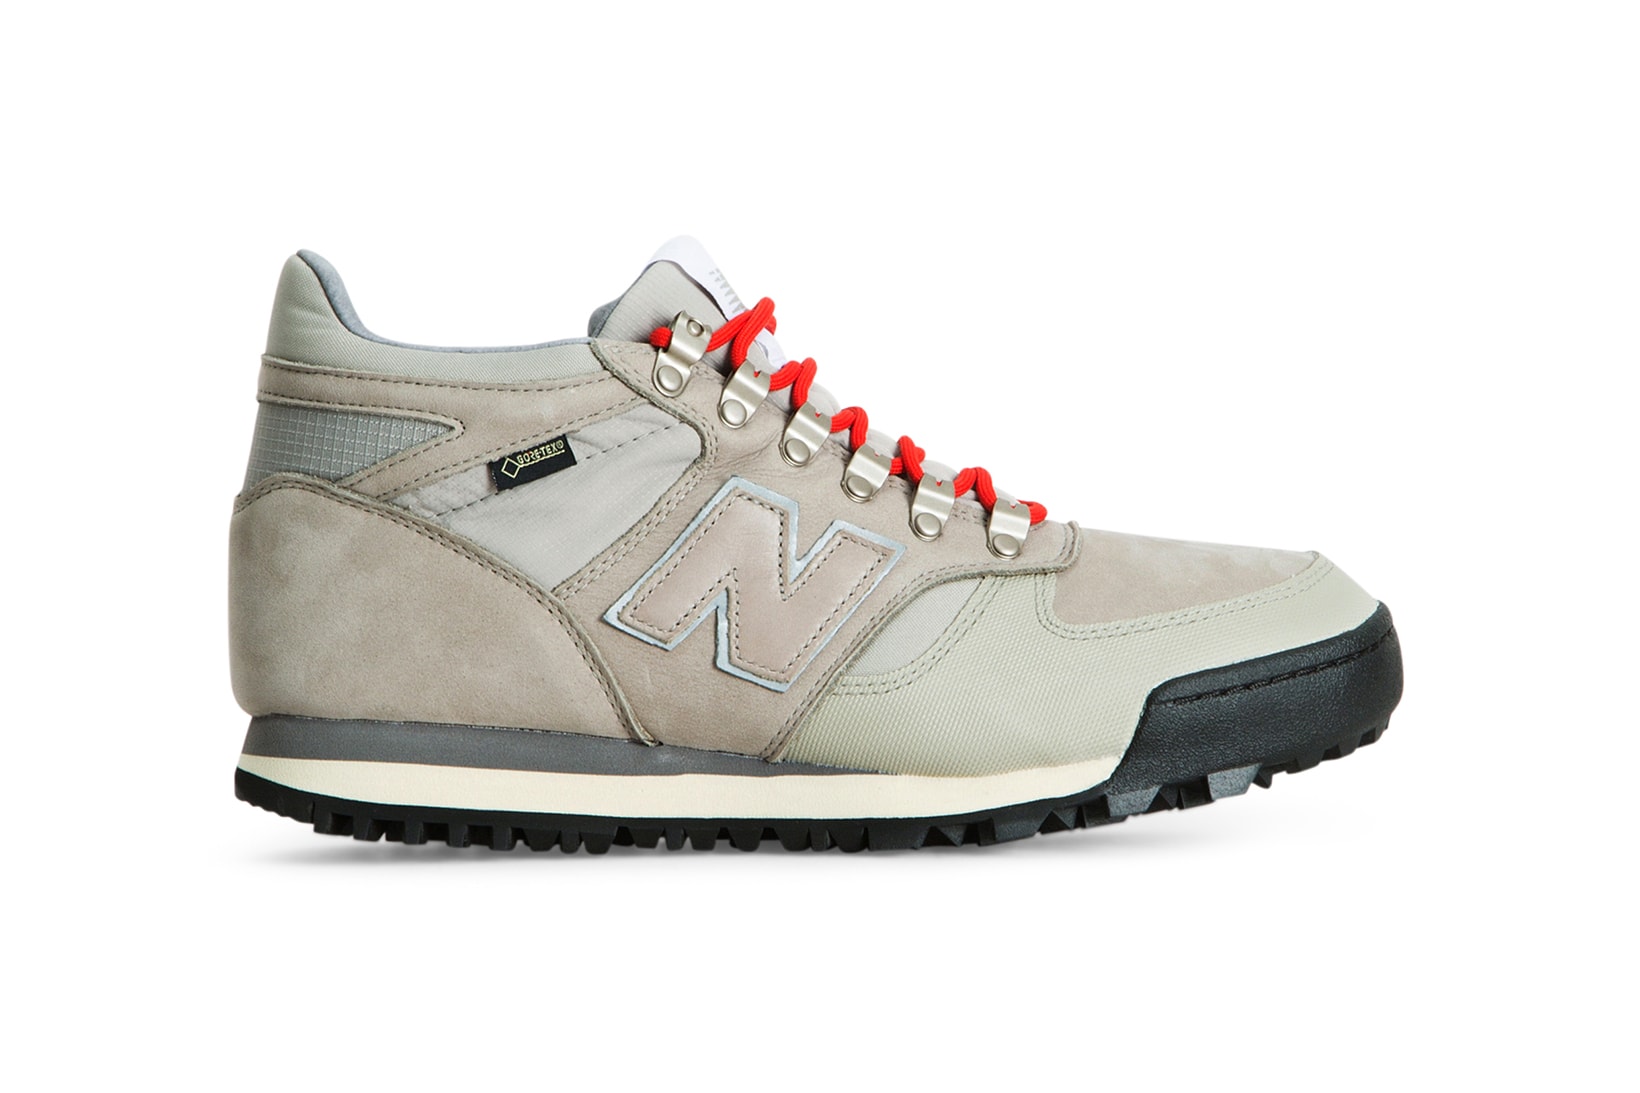 Norse Projects New Balance Rainier Danish Weather Pack